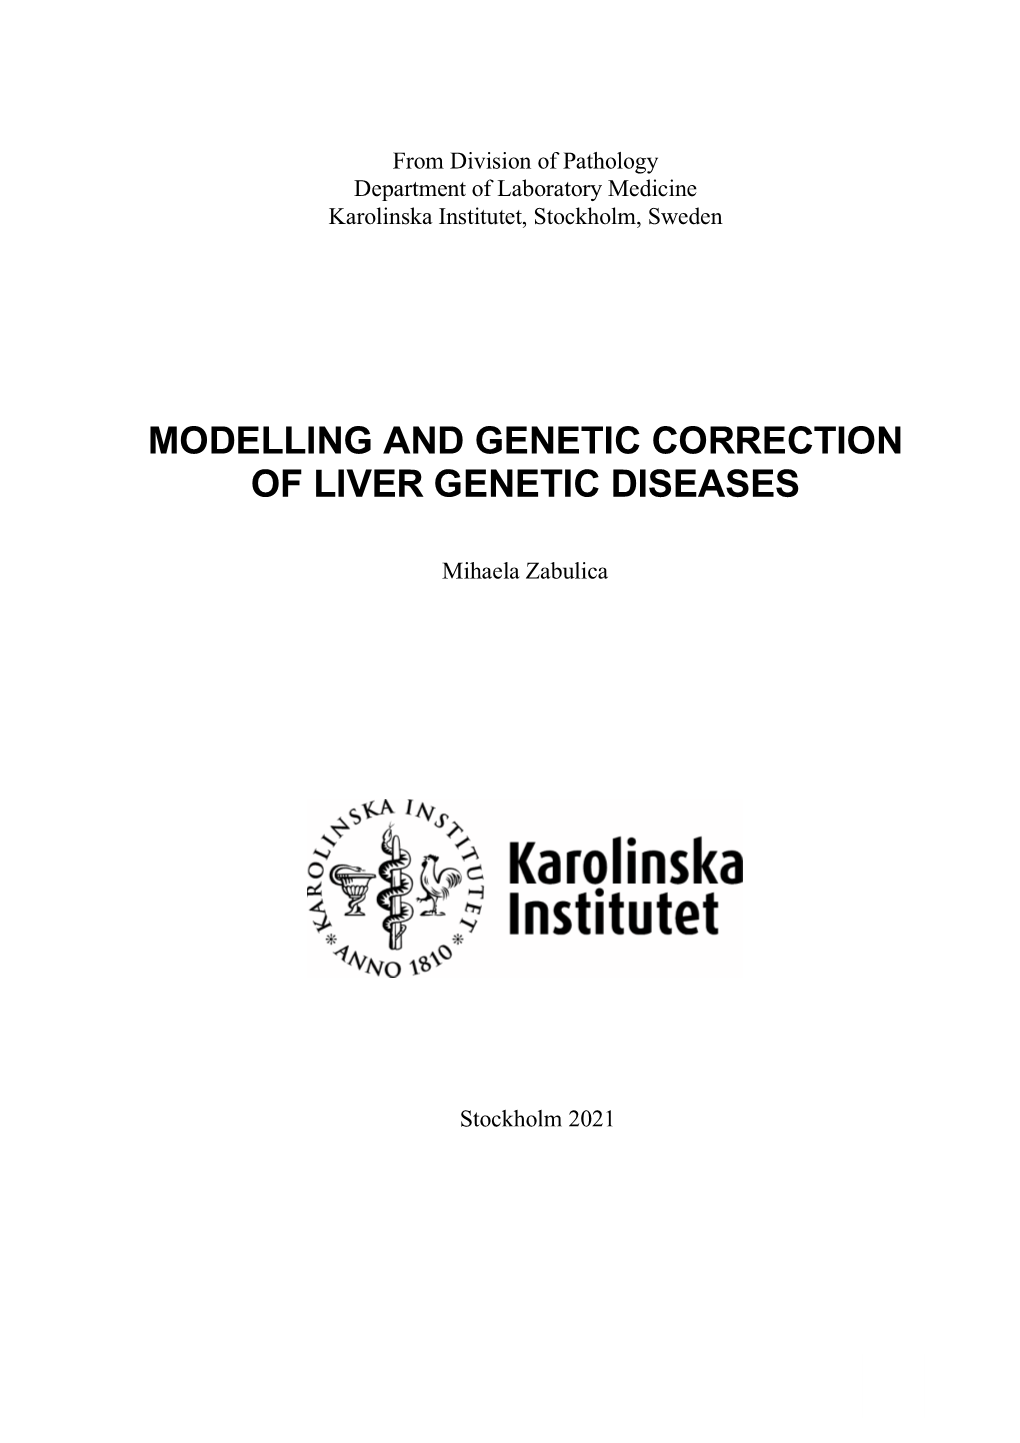 Modelling and Genetic Correction of Liver Genetic Diseases